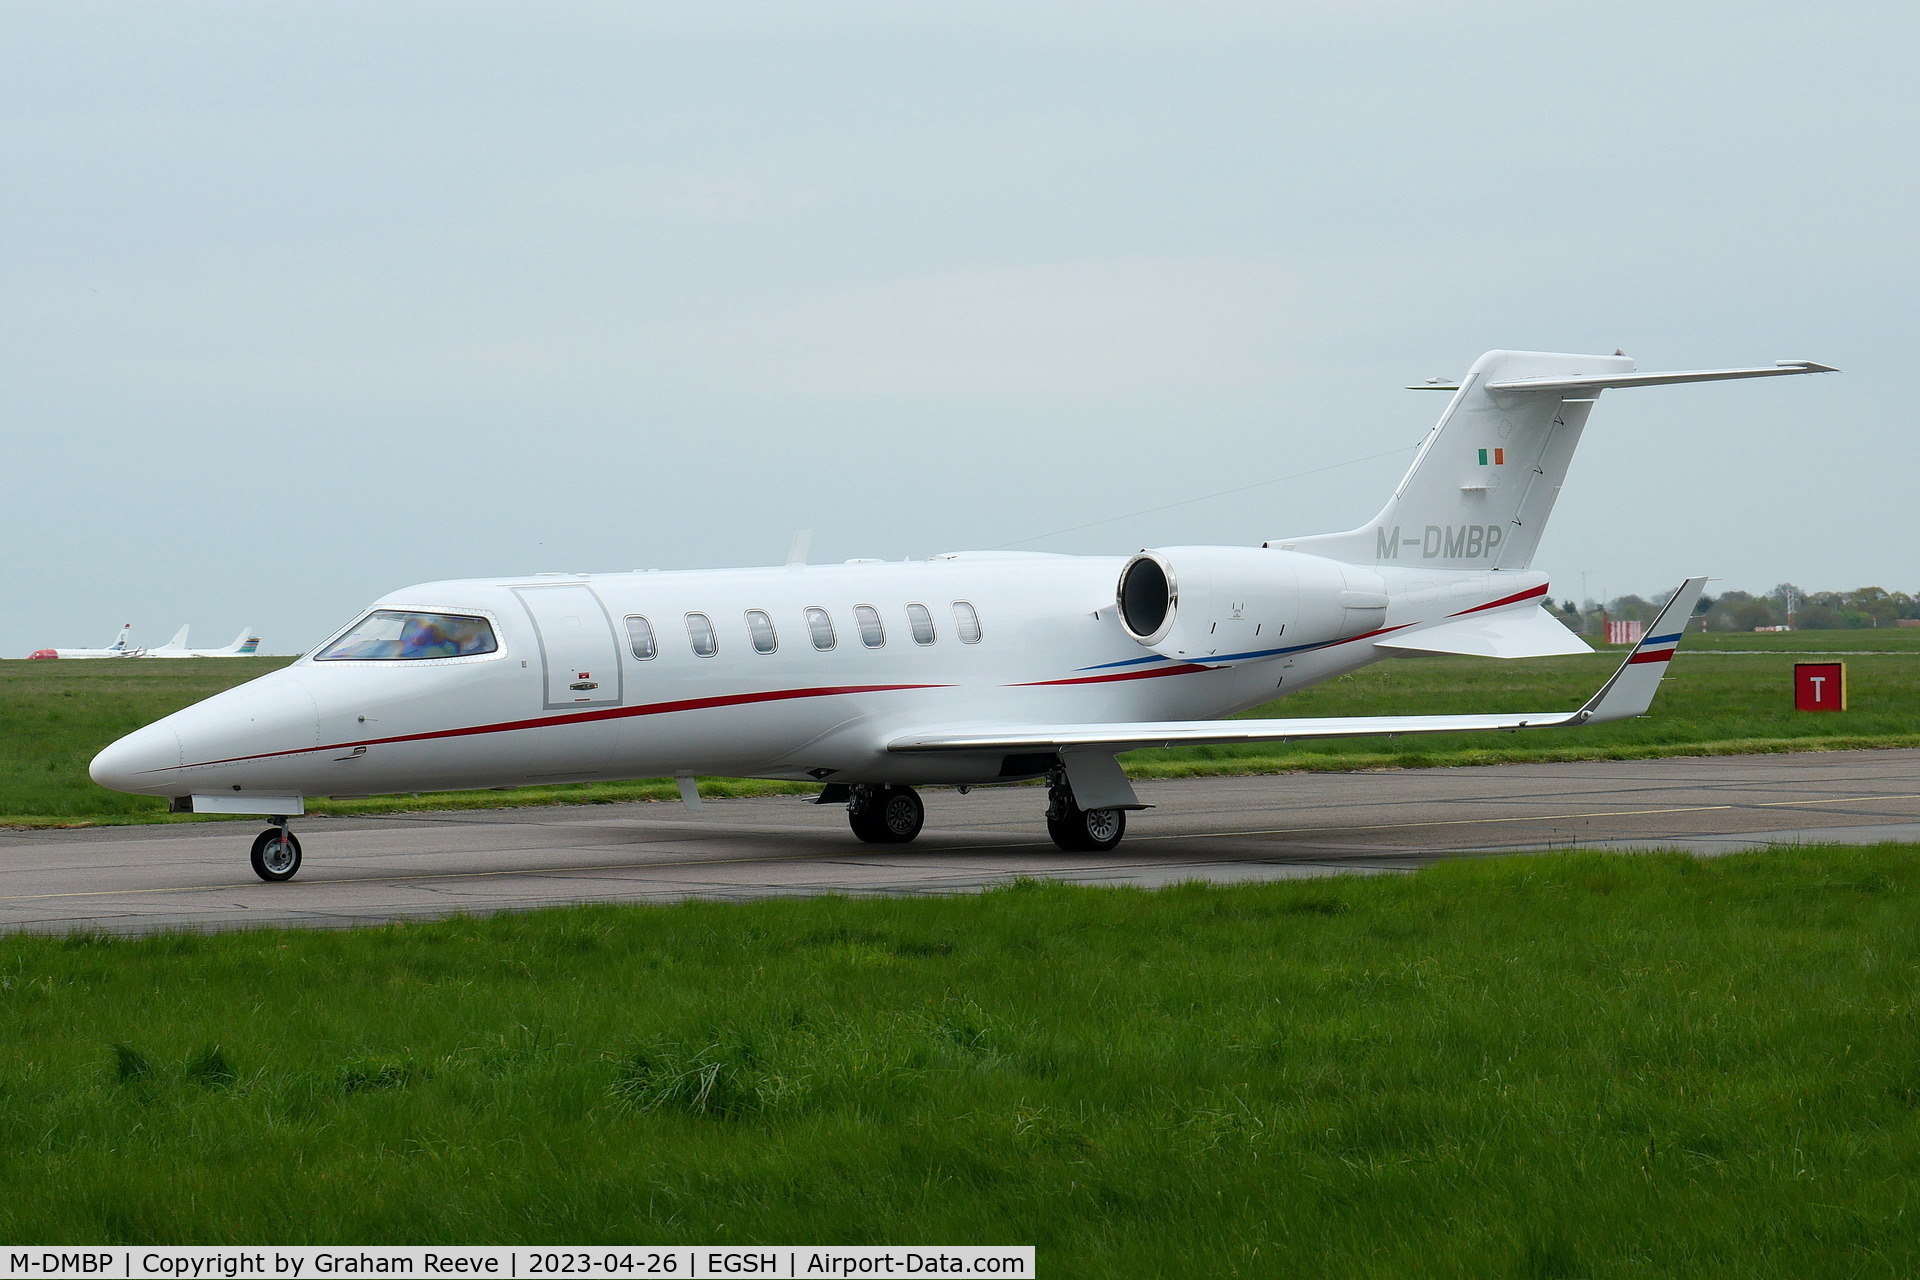 M-DMBP, 2012 Learjet 40 C/N 45-2133, Just landed at Norwich.